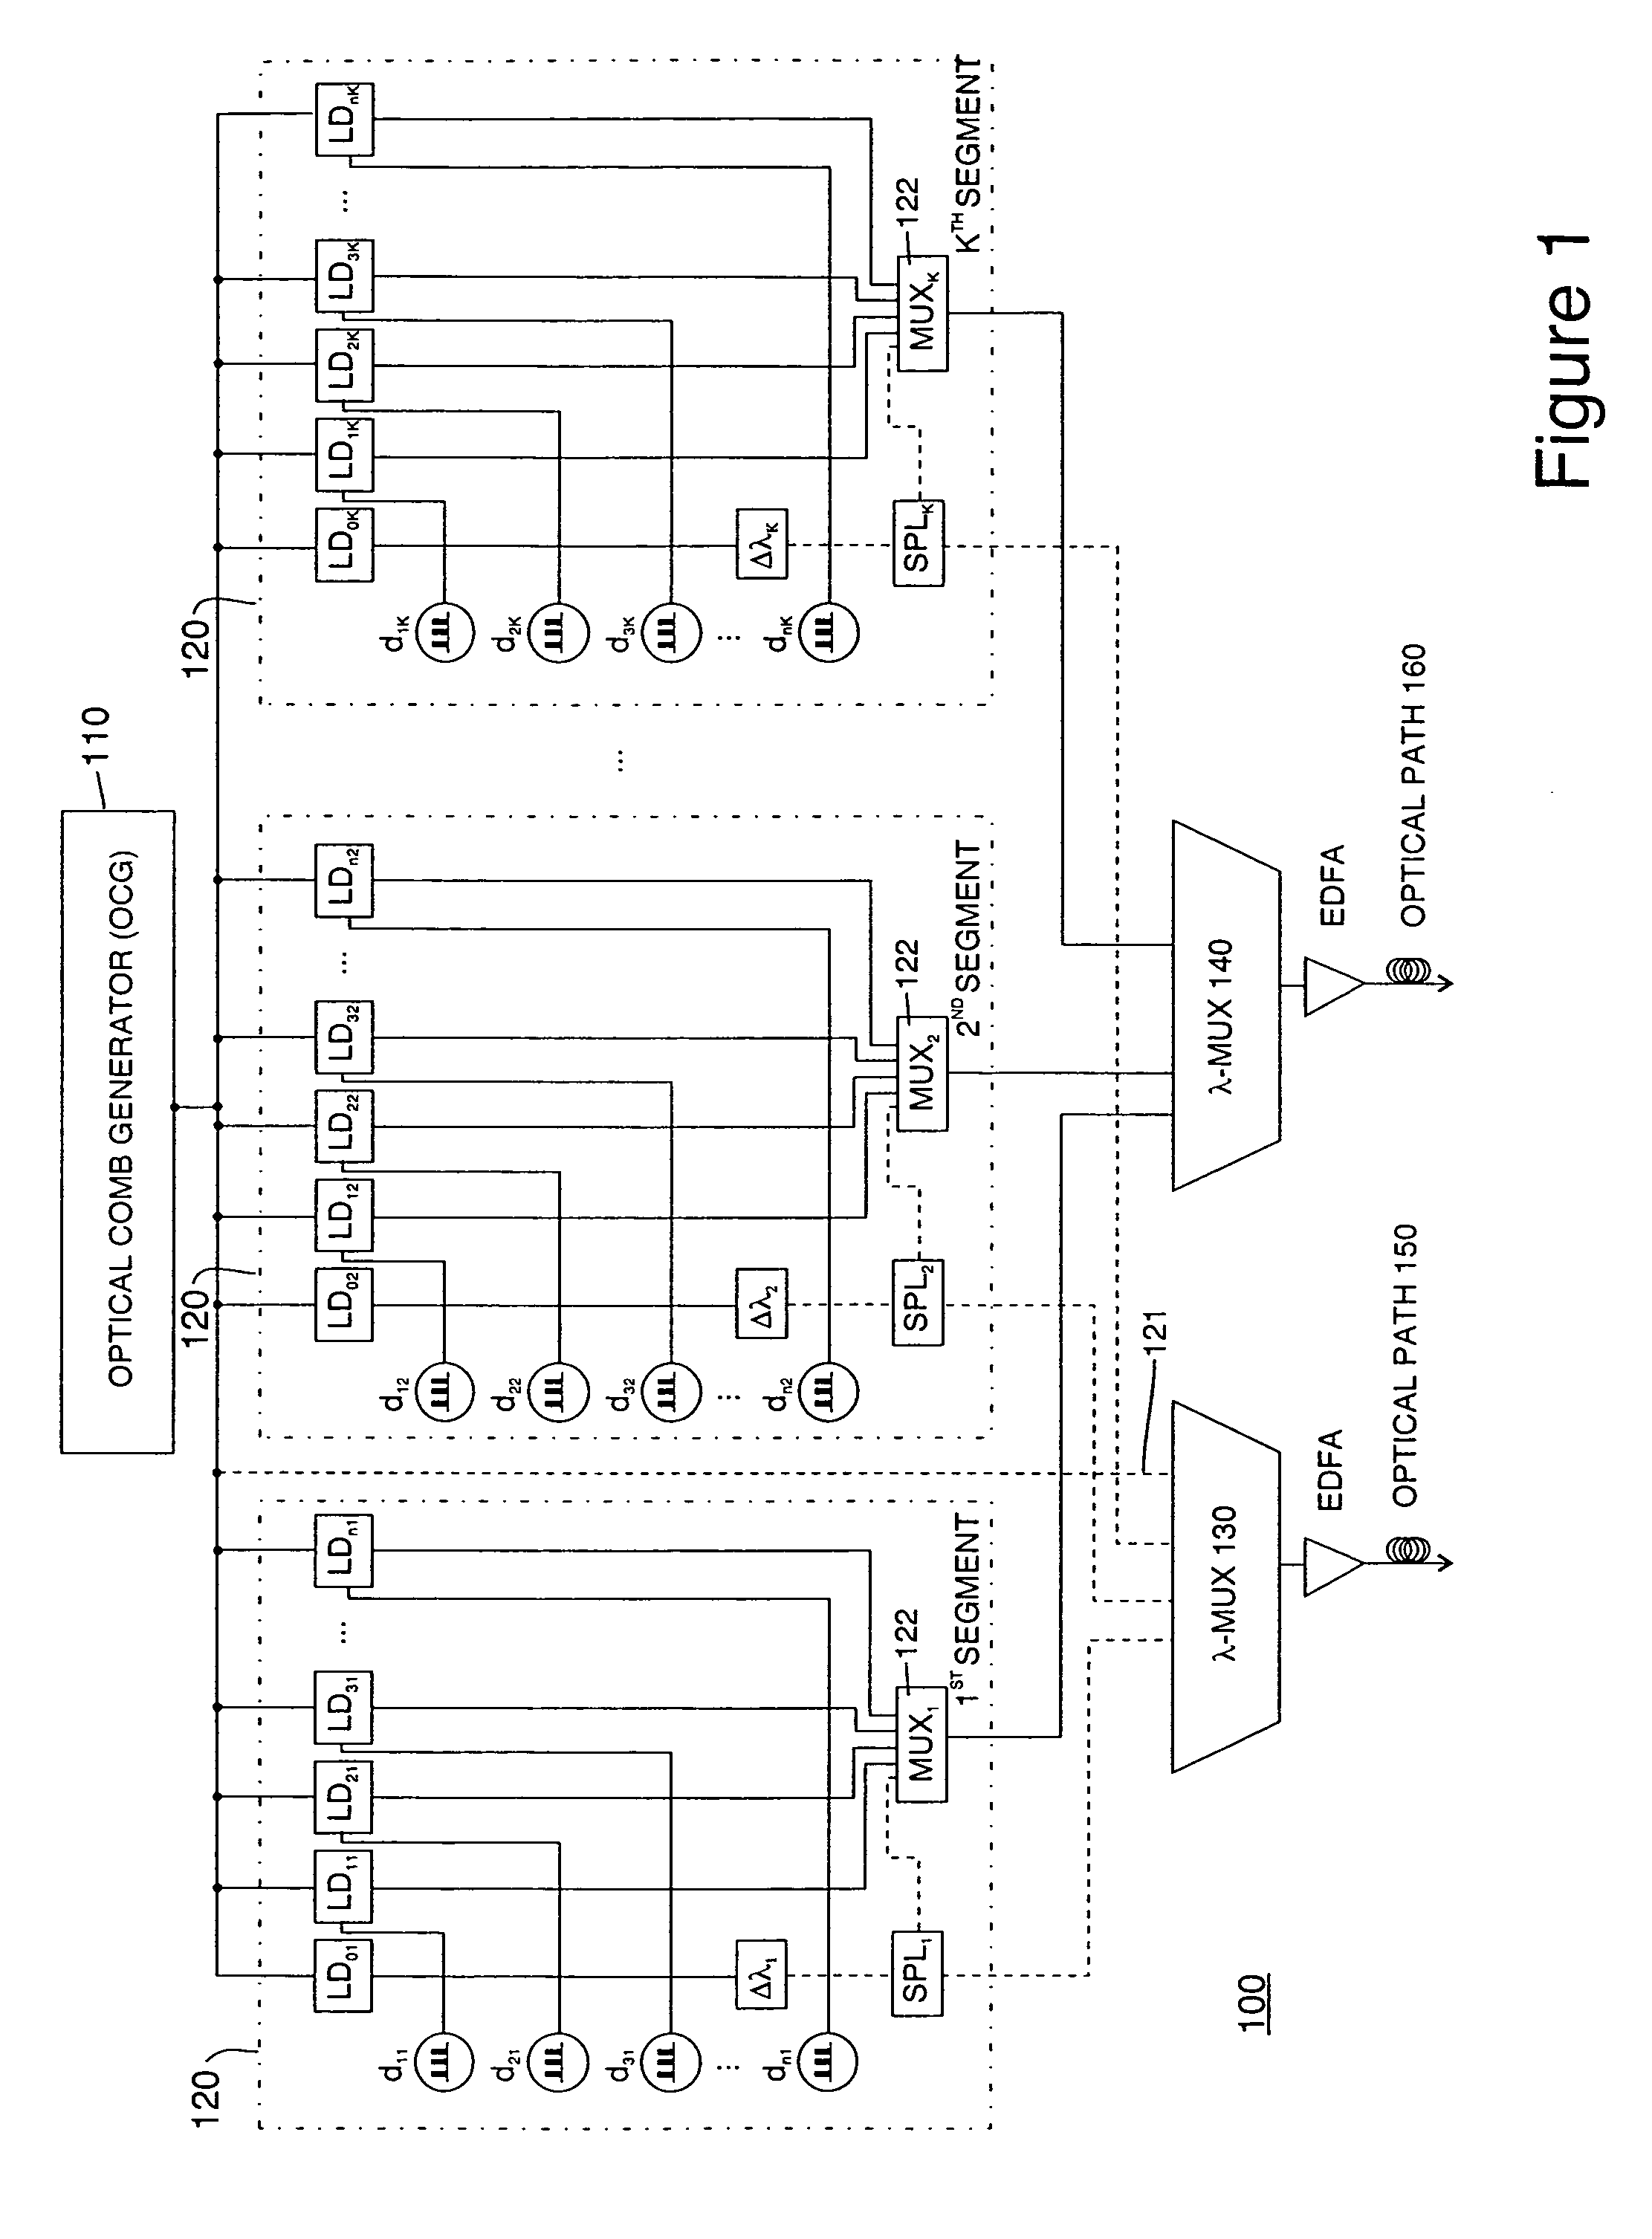 Ultra-dense wavelength and subcarrier multiplexed optical and RF/mm-wave transmission system